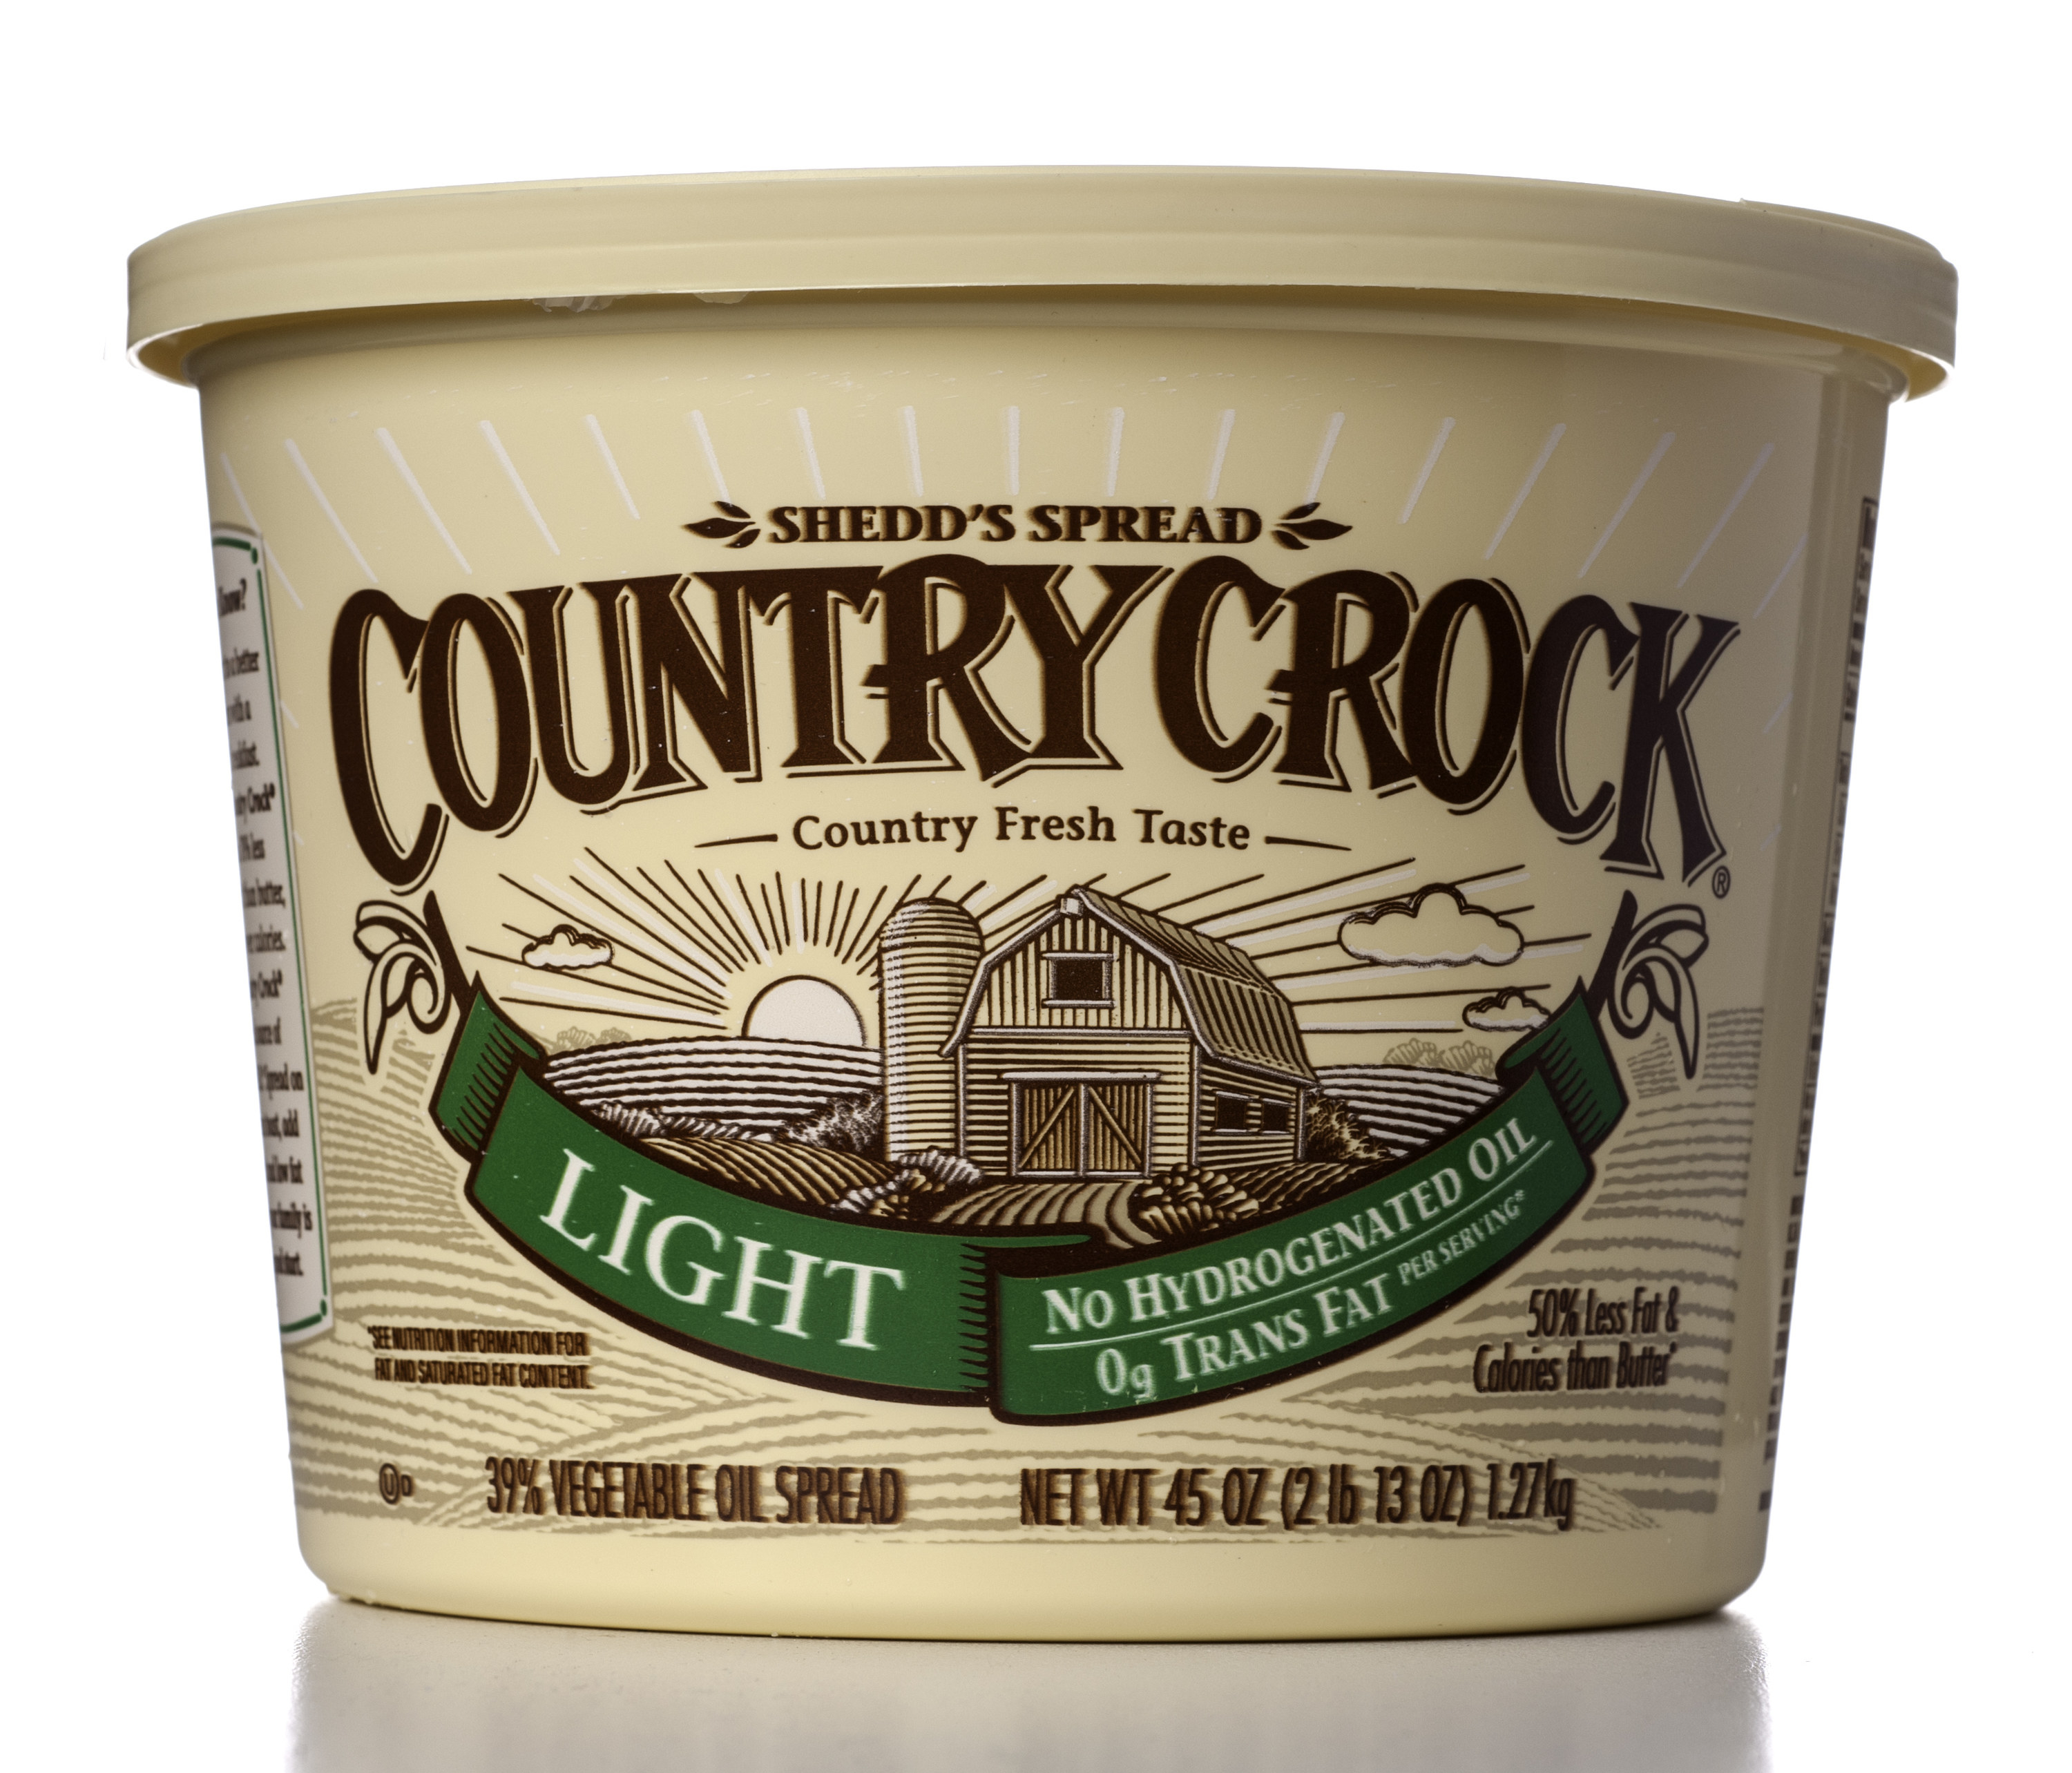 A container of Country Crock light spread